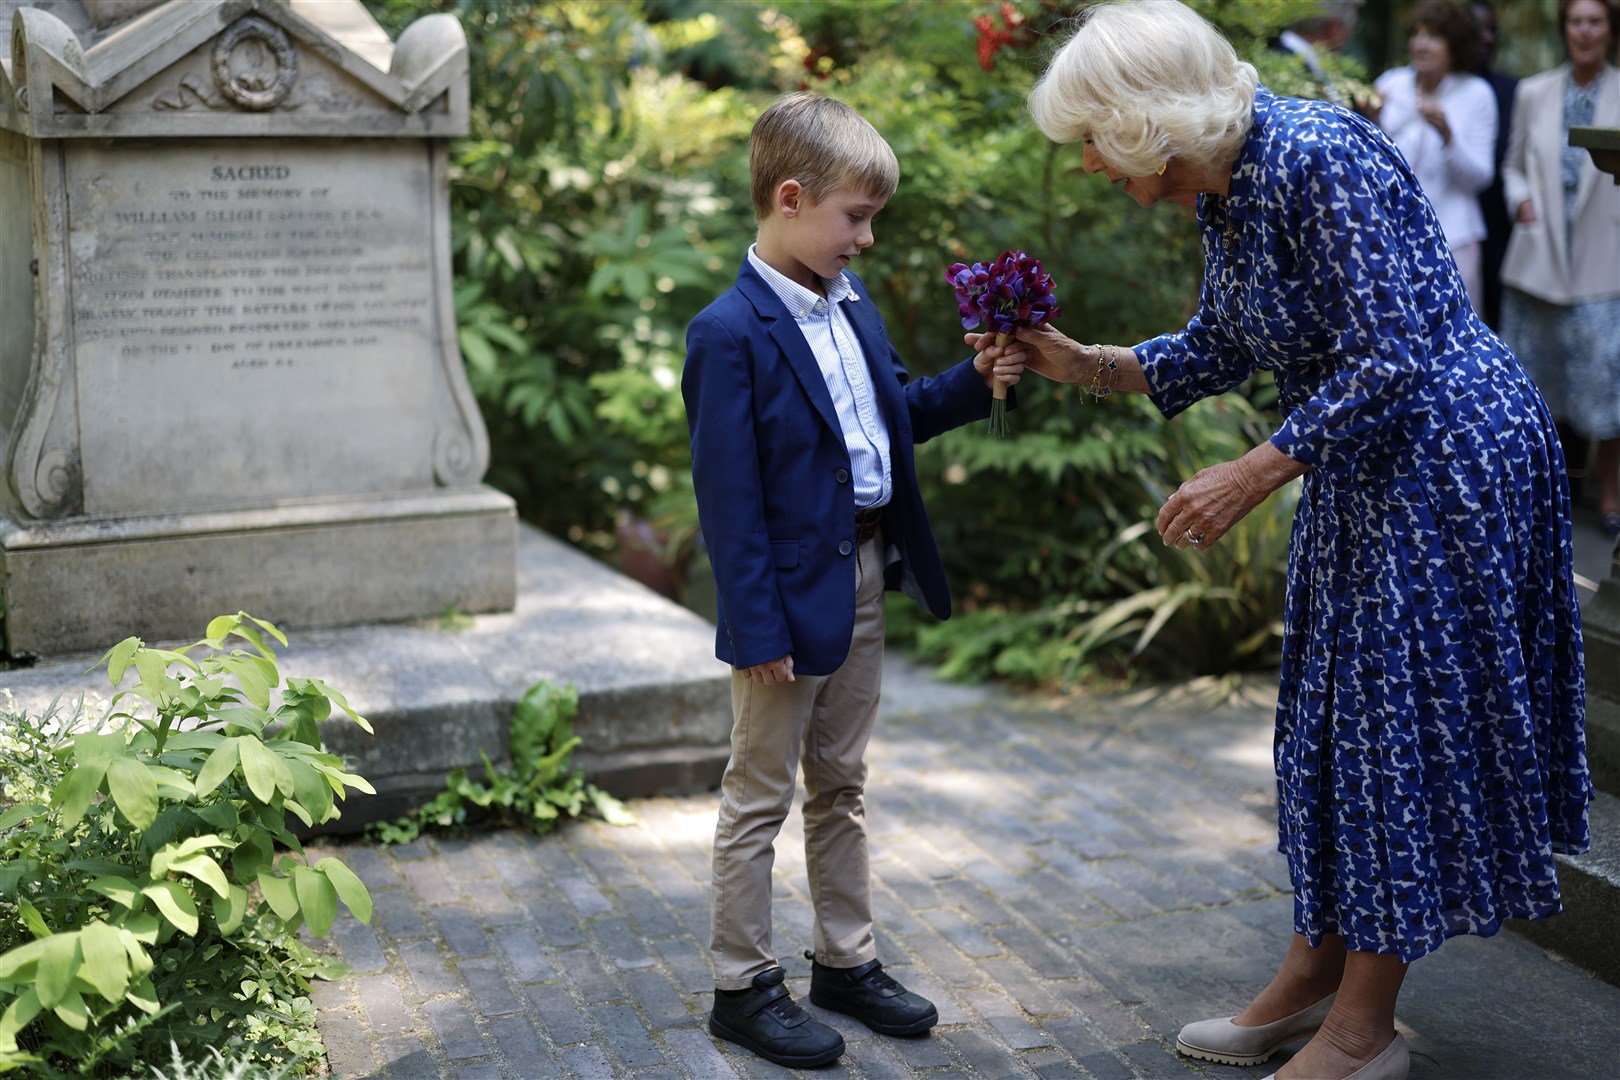 The Queen during a visit to the Garden Museum in Lambeth (Geoff Pugh/Daily Telegraph/PA)